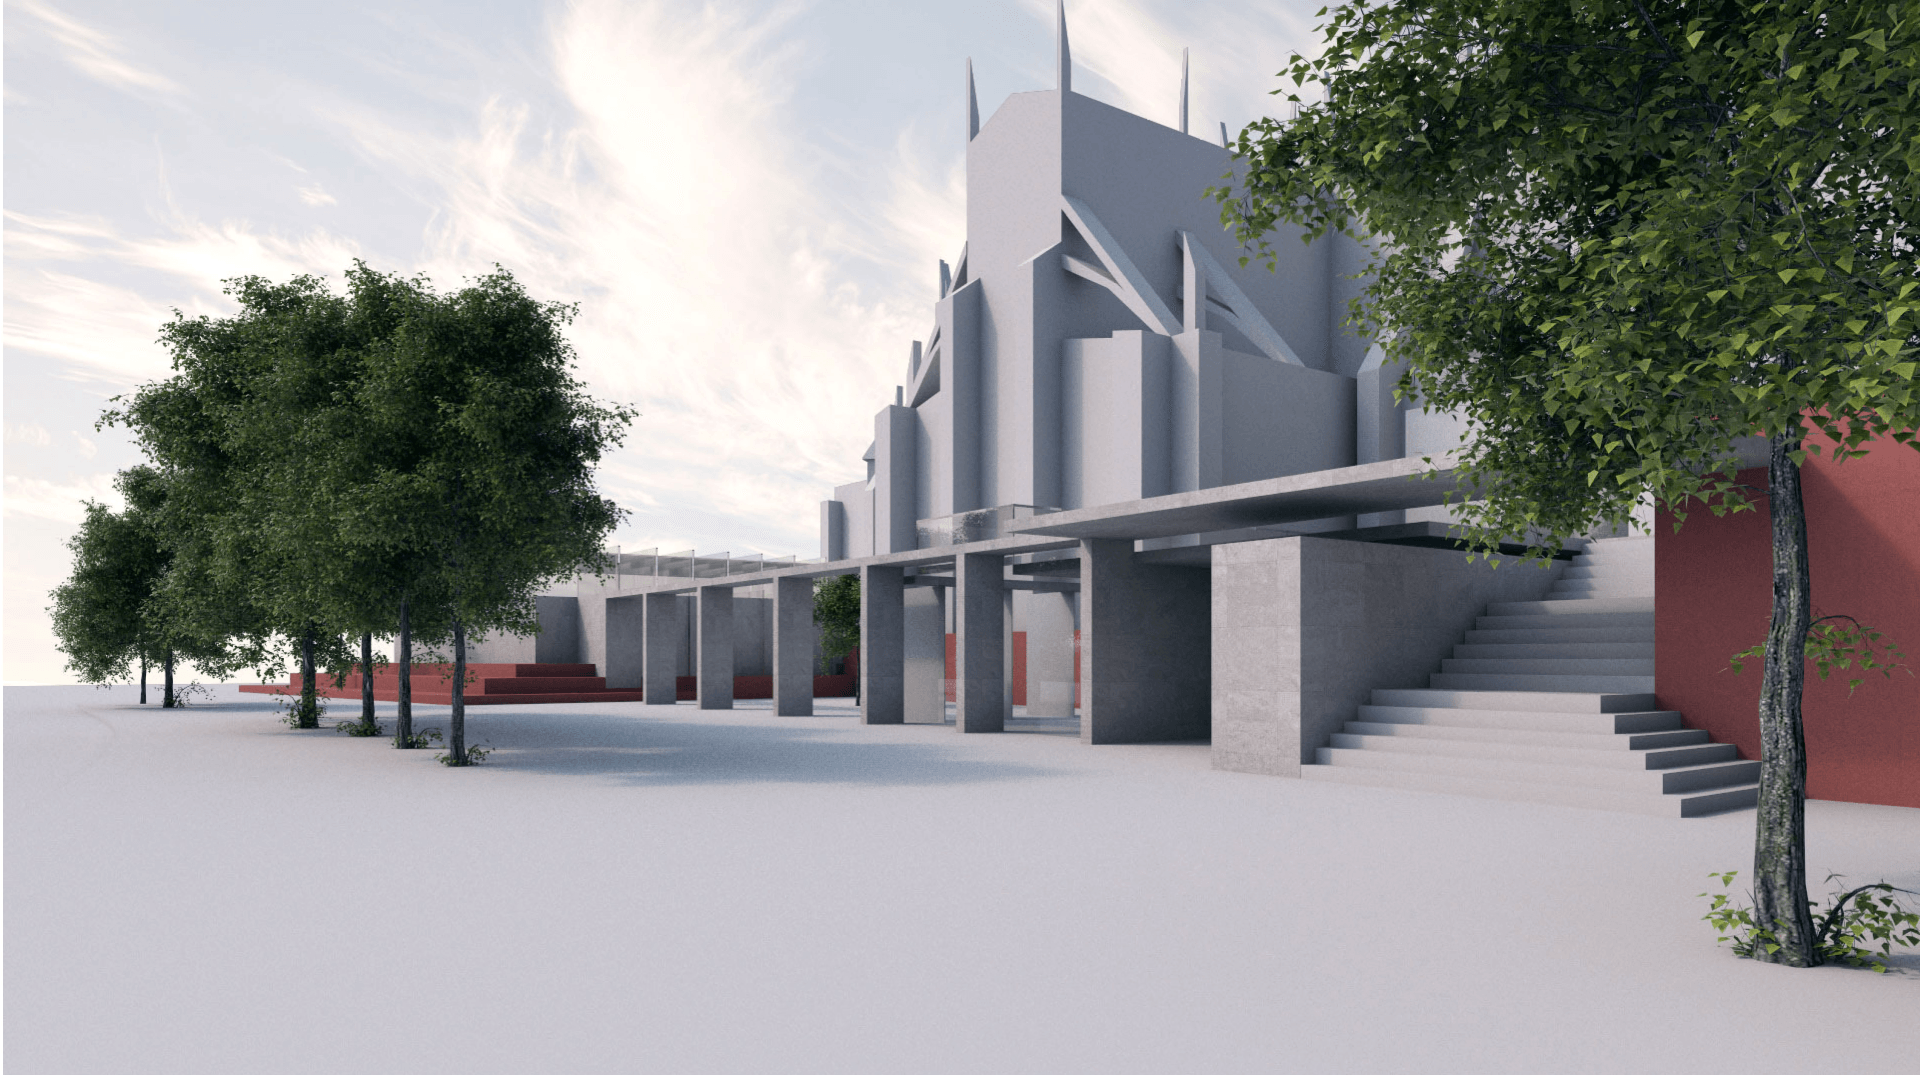 A concept design by architect Dan Talkes for new facilities at St Mary Redcliffe Church